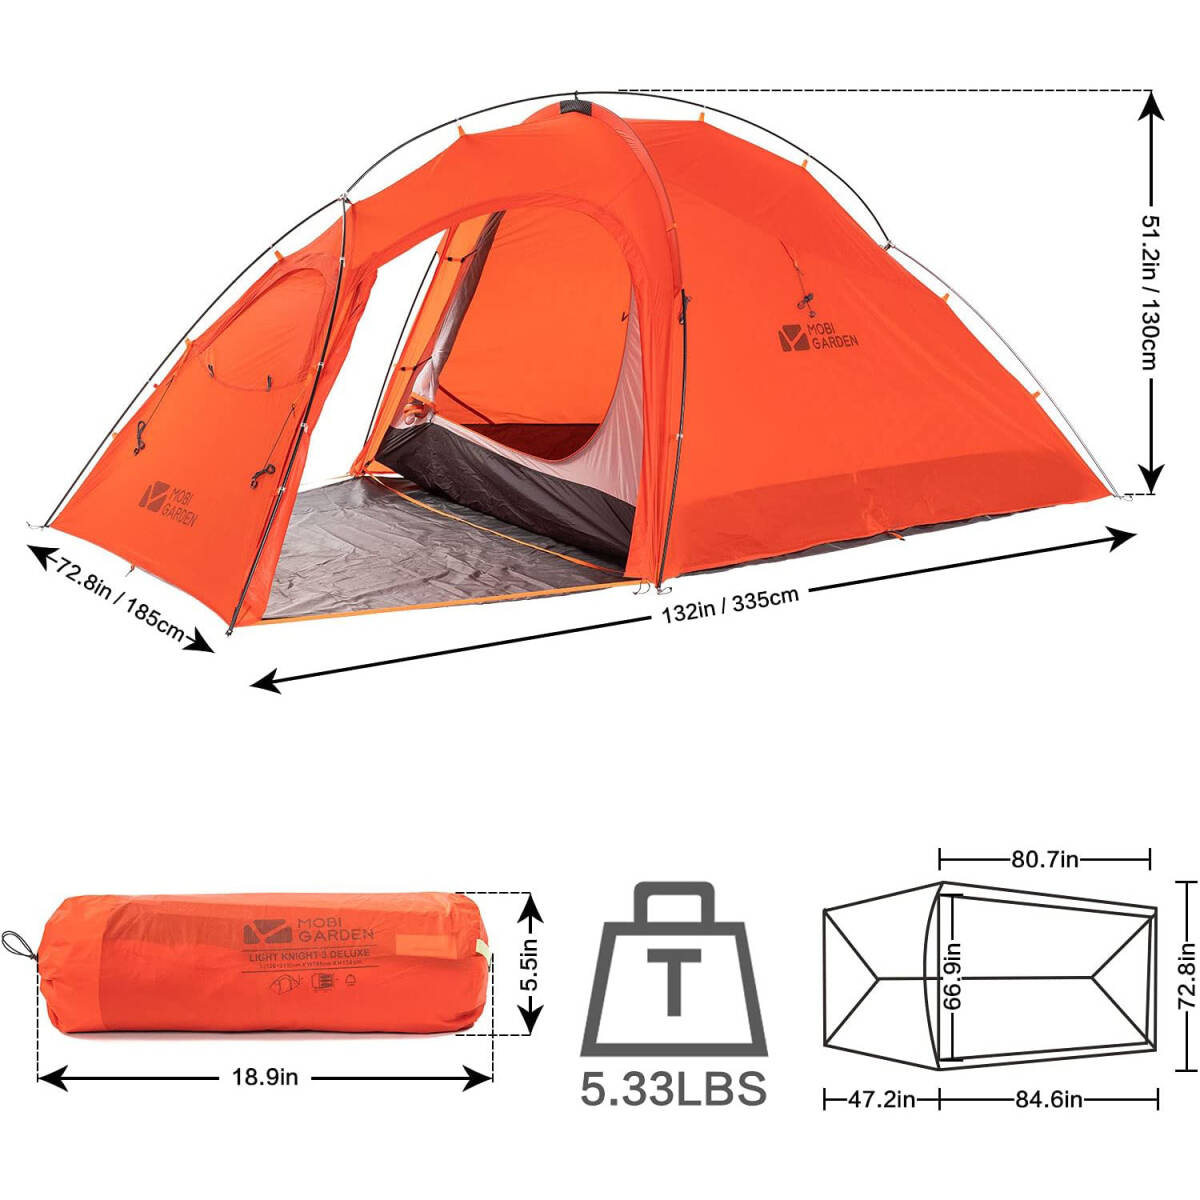 MOBI GARDEN(モビガーデン) LIGHT KNIGHT 3 DELUXE TENT キャンプテント 1~3人用 バックパッキングテント 防水 軽量 コンパクト オレンジ_画像3